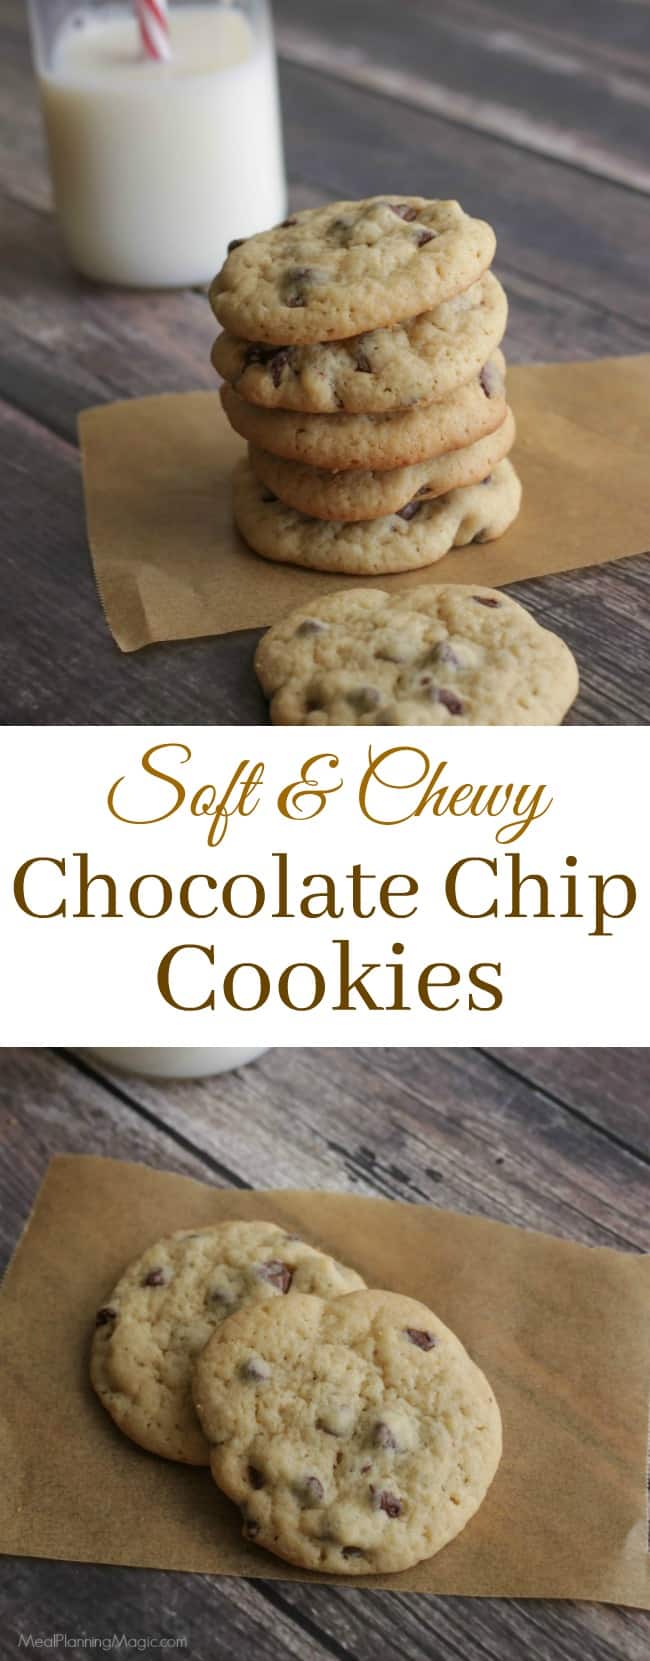 If you love a softer, chewier cookie, my Classic Chocolate Chip Cookies fit the bill. With only a few basic ingredients, they will disappear almost as fast as you can make them! Recipe at MealPlanningMagic.com